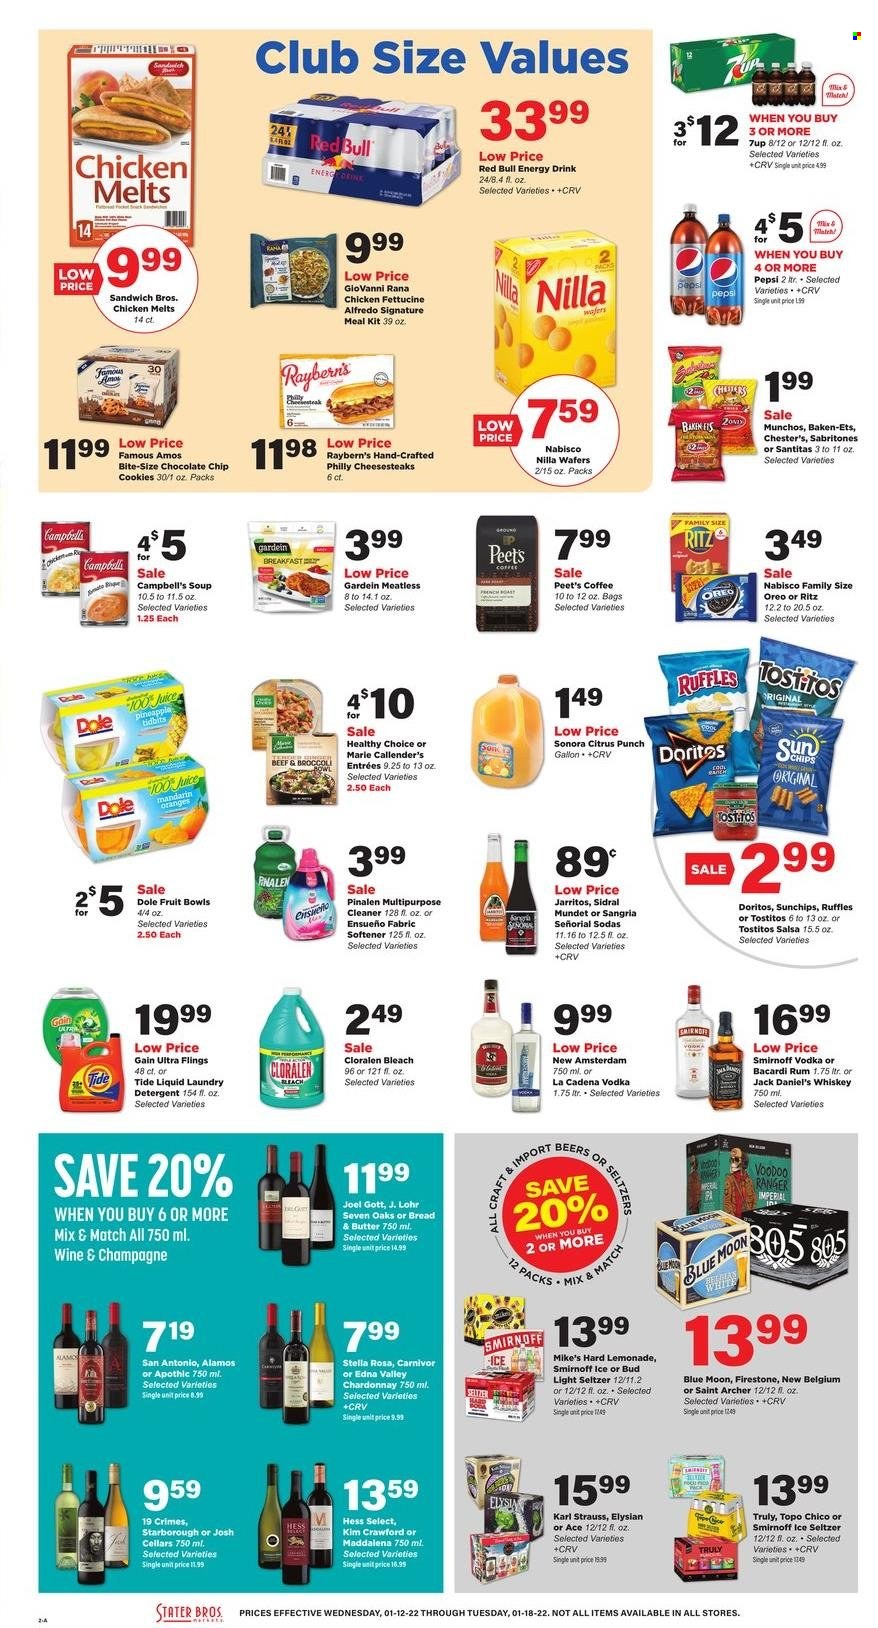 thumbnail - Stater Bros. Flyer - 01/12/2022 - 01/18/2022 - Sales products - Dole, Campbell's, Jack Daniel's, sandwich, soup, Giovanni Rana, Healthy Choice, Marie Callender's, Rana, butter, cookies, wafers, RITZ, Doritos, chips, Ruffles, Tostitos, salsa, lemonade, Pepsi, juice, energy drink, 7UP, Red Bull, fruit punch, coffee, white wine, champagne, Chardonnay, wine, Bacardi, rum, Smirnoff, vodka, whiskey, Hard Seltzer, TRULY, whisky, beer, Bud Light, detergent, Gain, cleaner, bleach, Tide, fabric softener, laundry detergent, Blue Moon. Page 2.